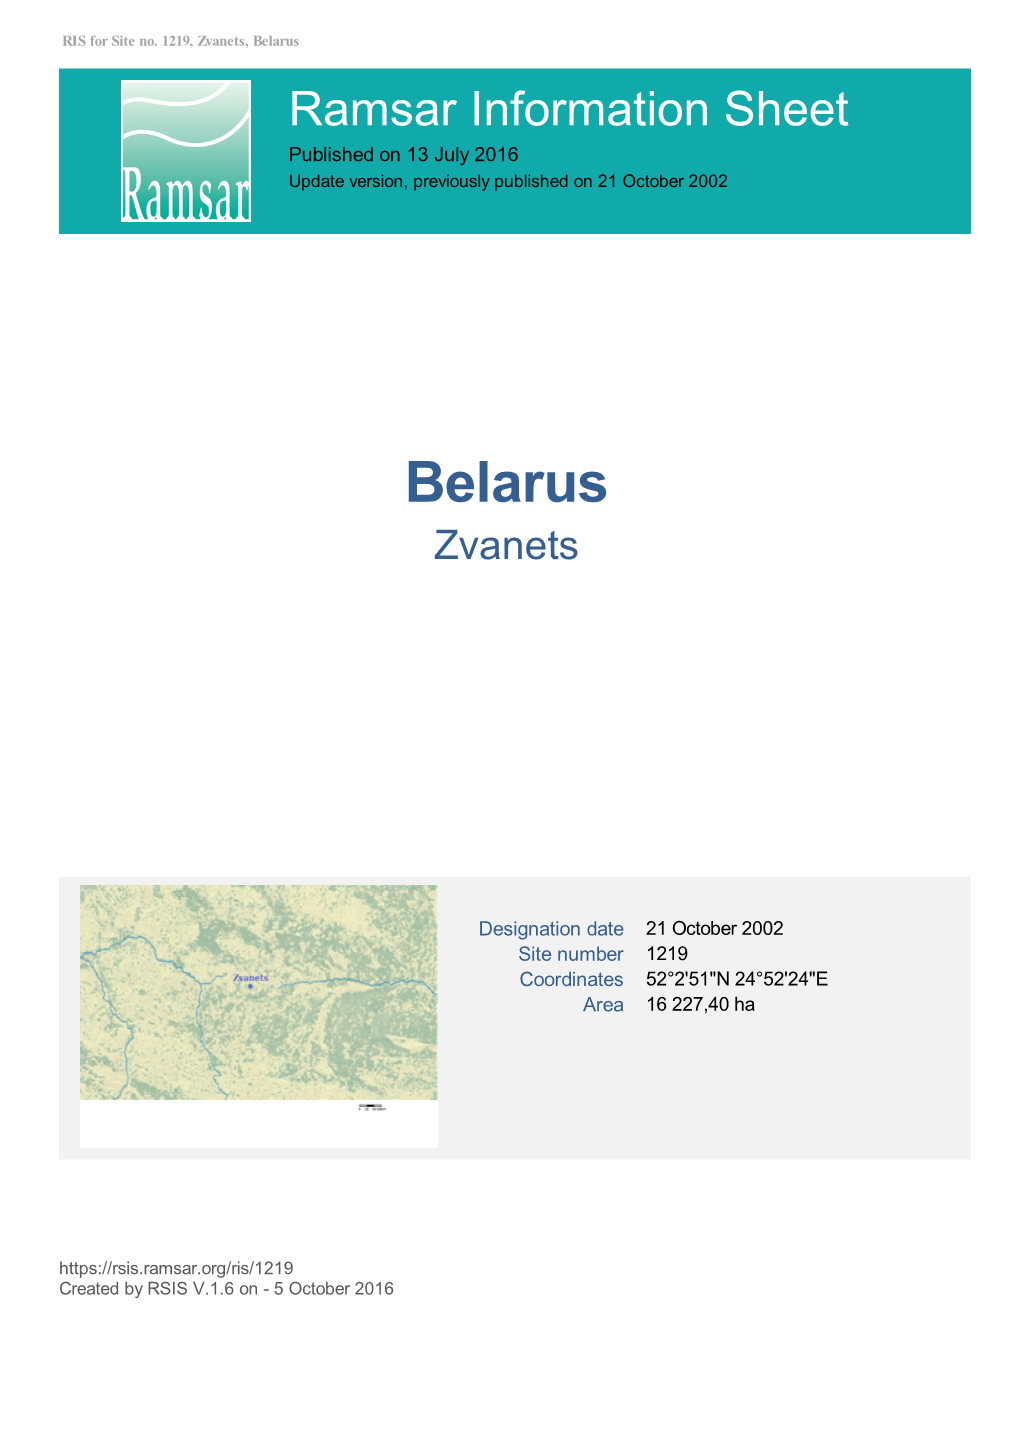 Download/Monitoring Reports/Belarus 2013 AW Monitoring Report Final.Pd F